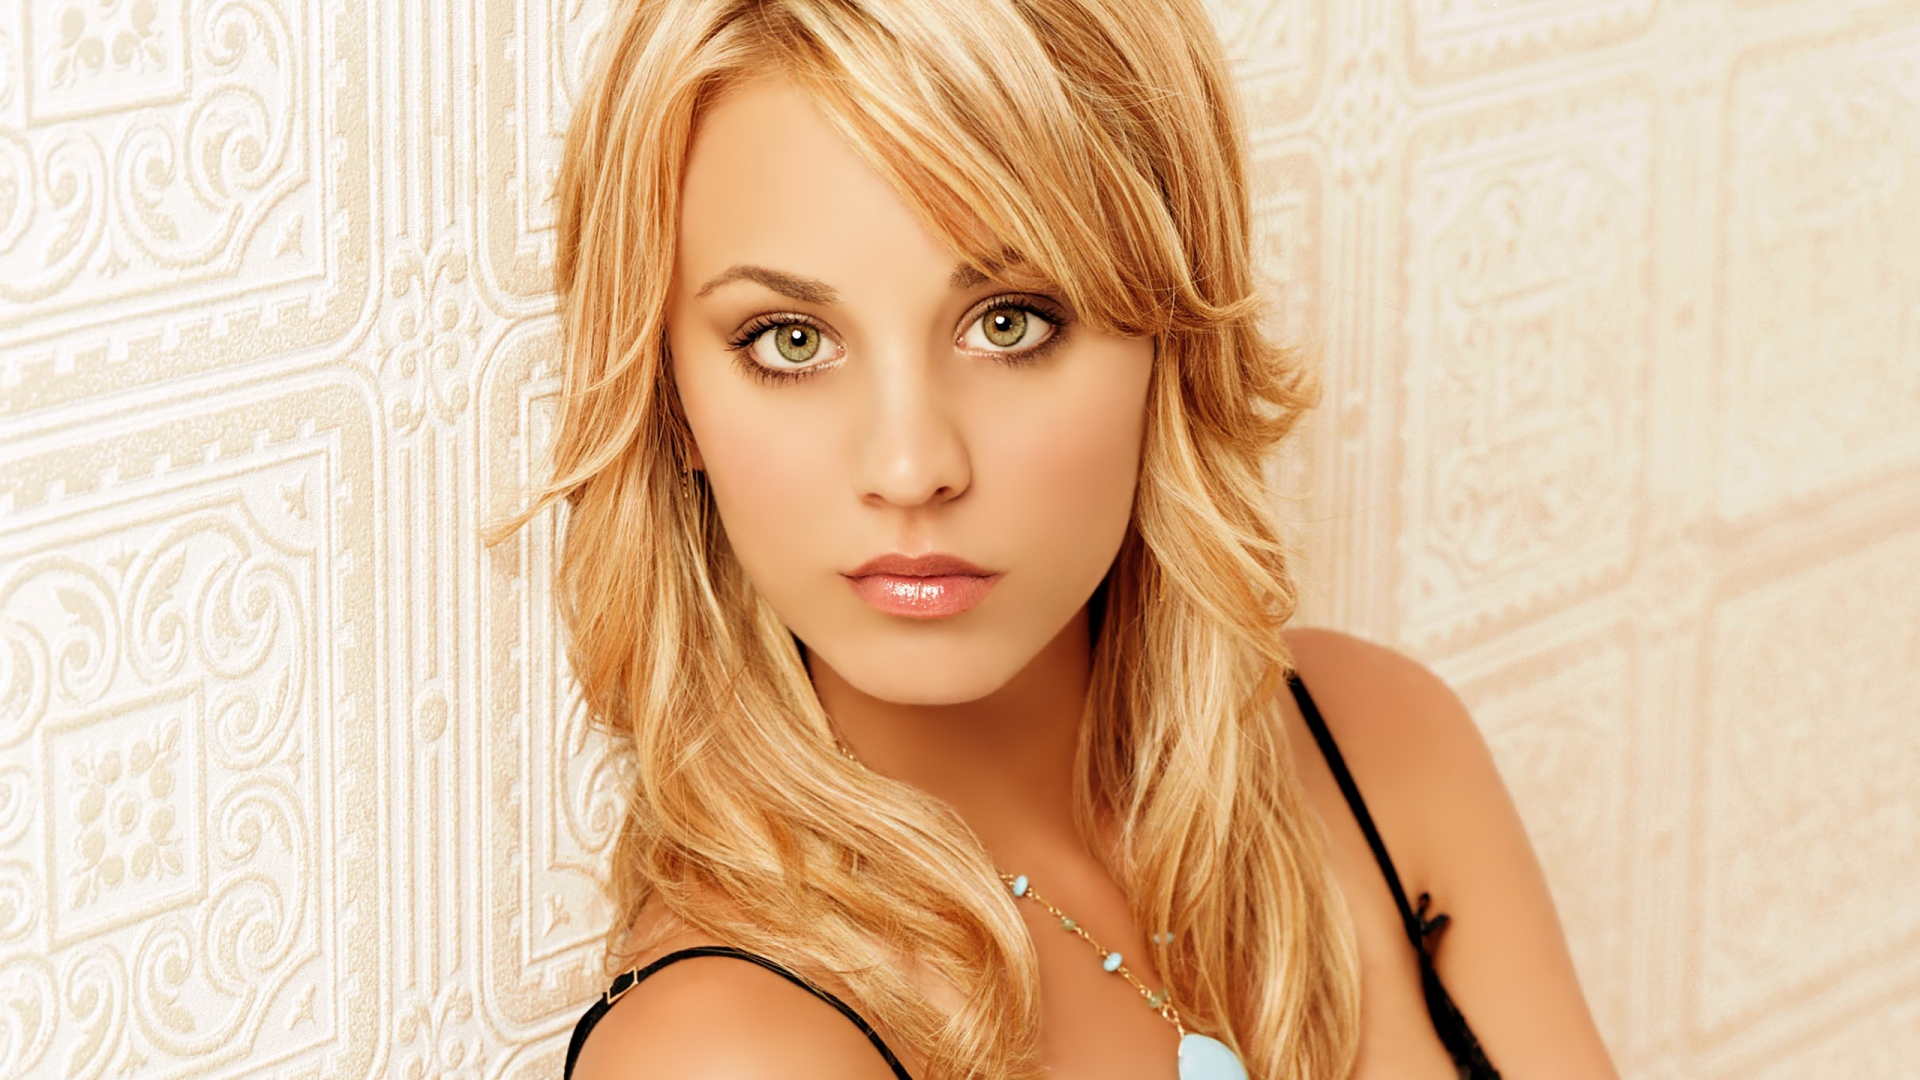 Beautiful Kaley Cuoco for 1920 x 1080 HDTV 1080p resolution